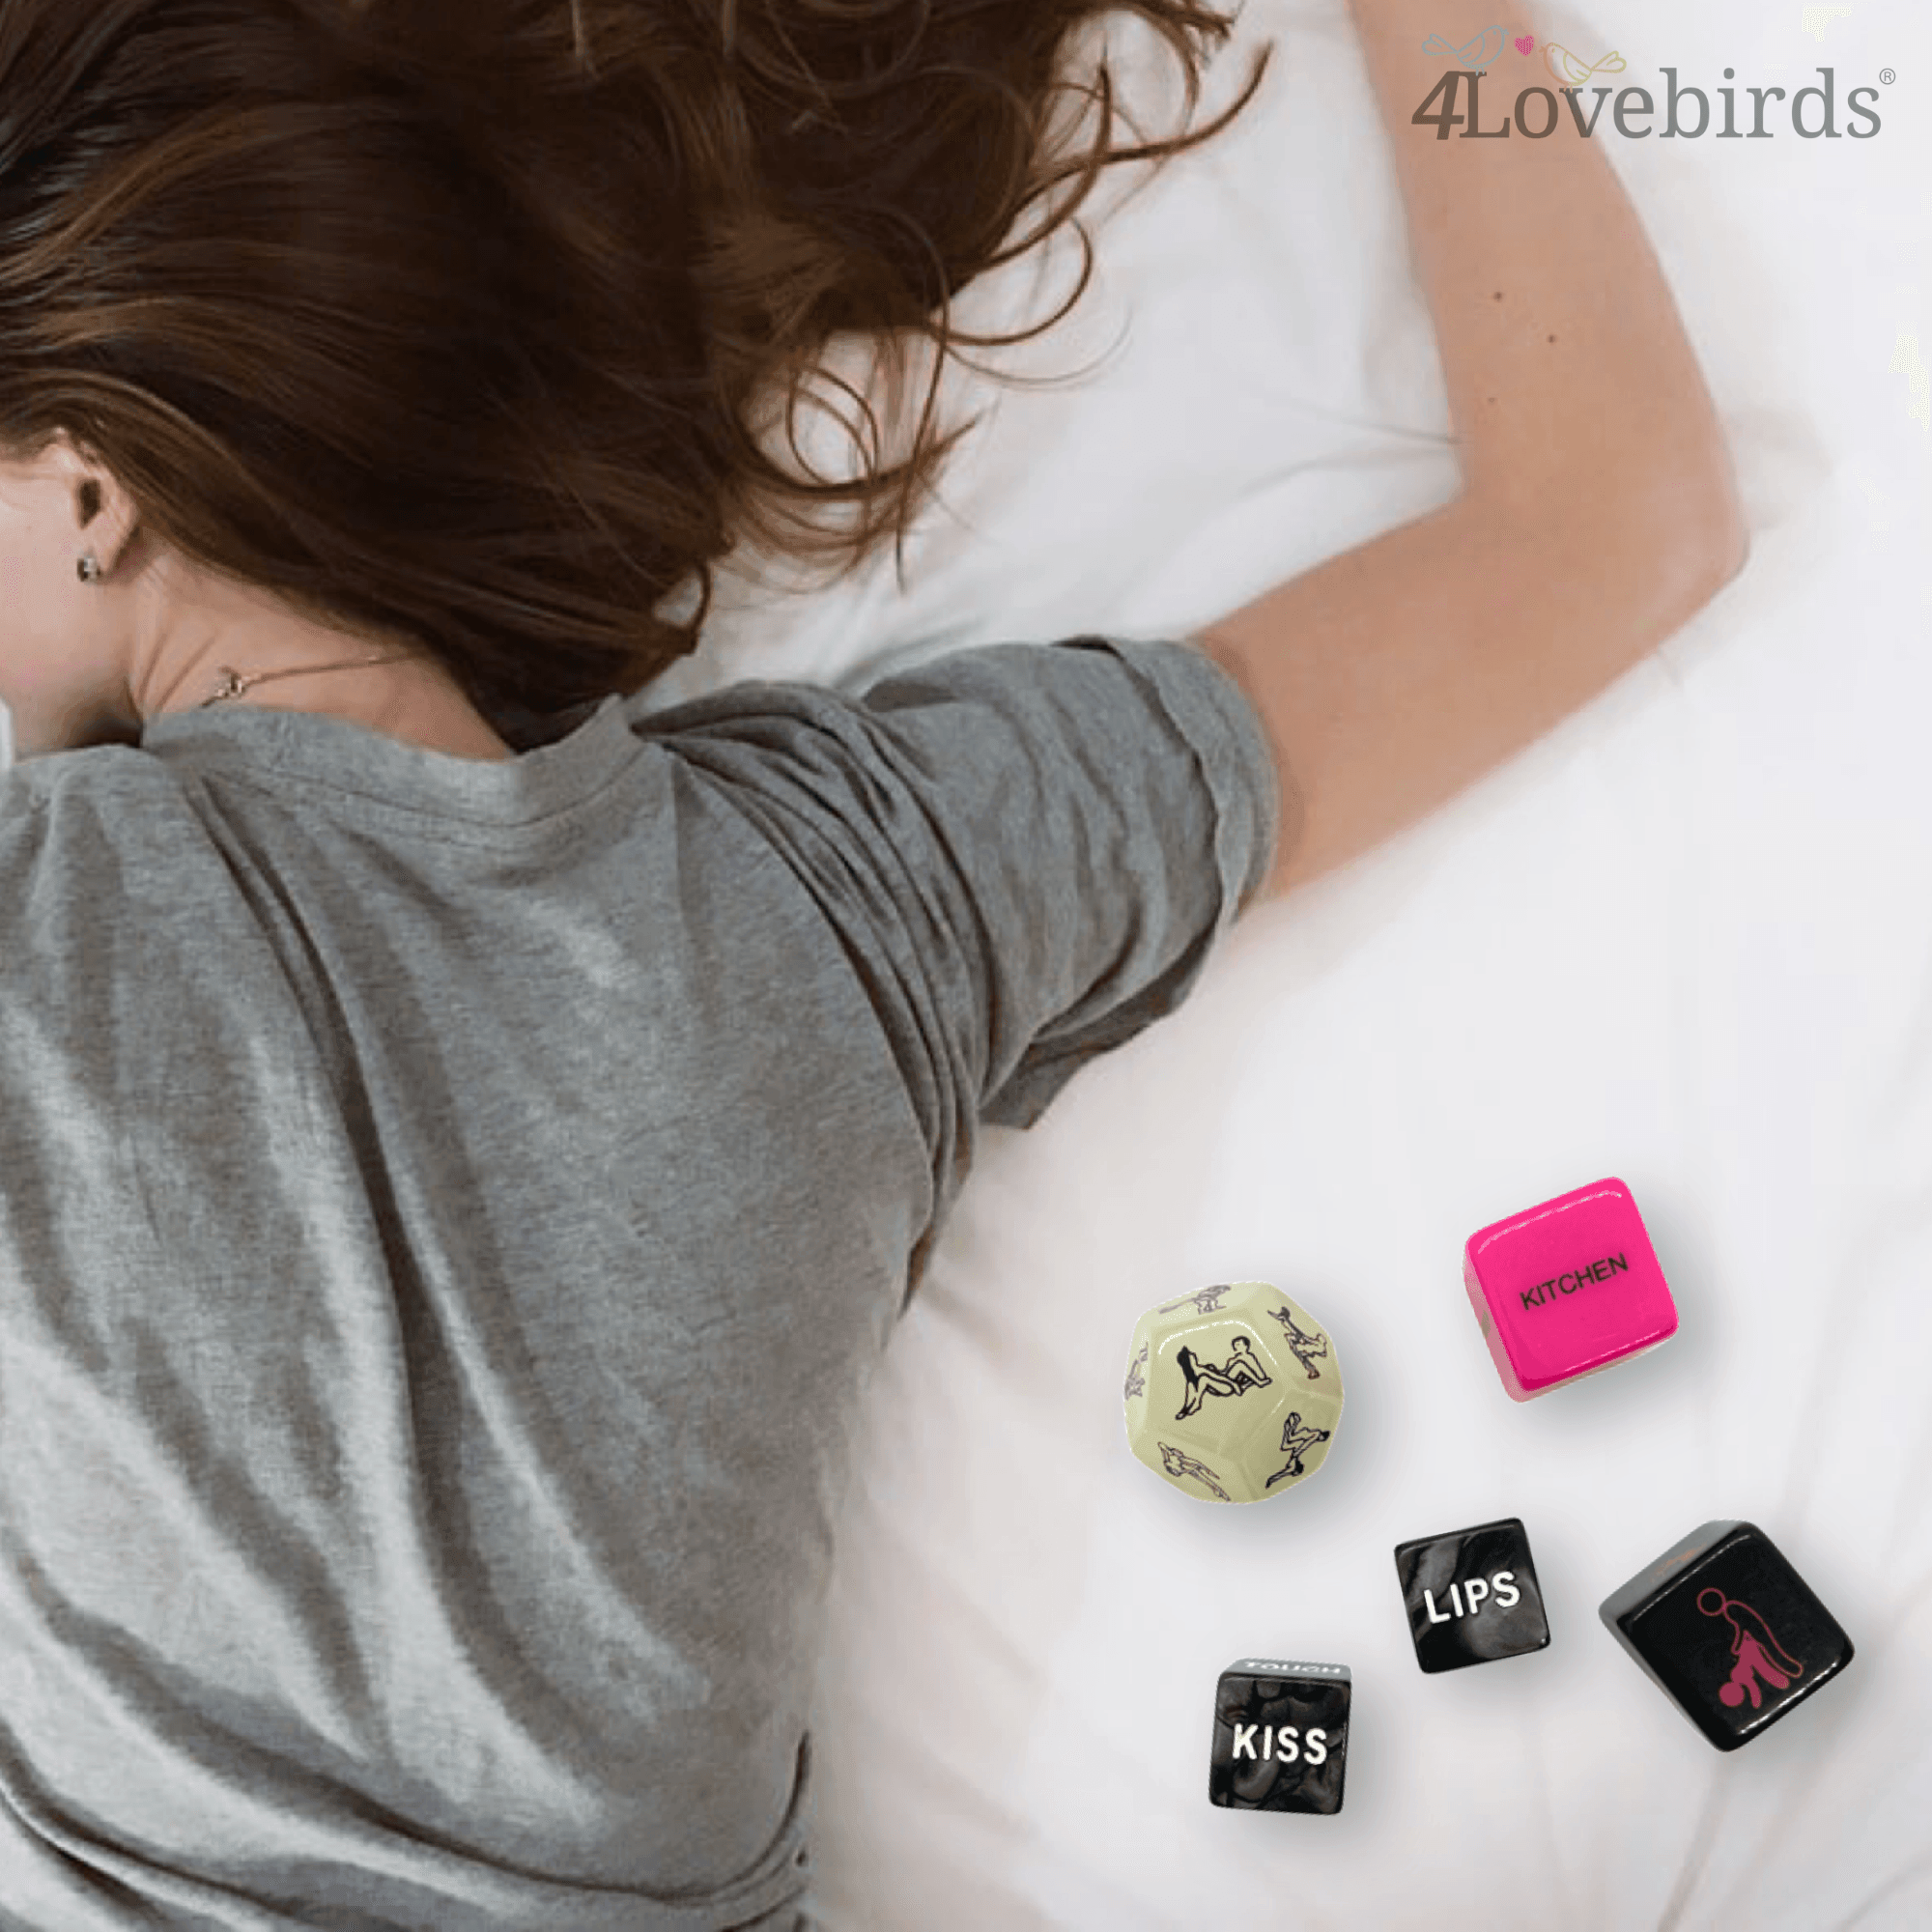 Sex Dice, sex positions, fun in the bedroom, bedroom game, fun game, h photo